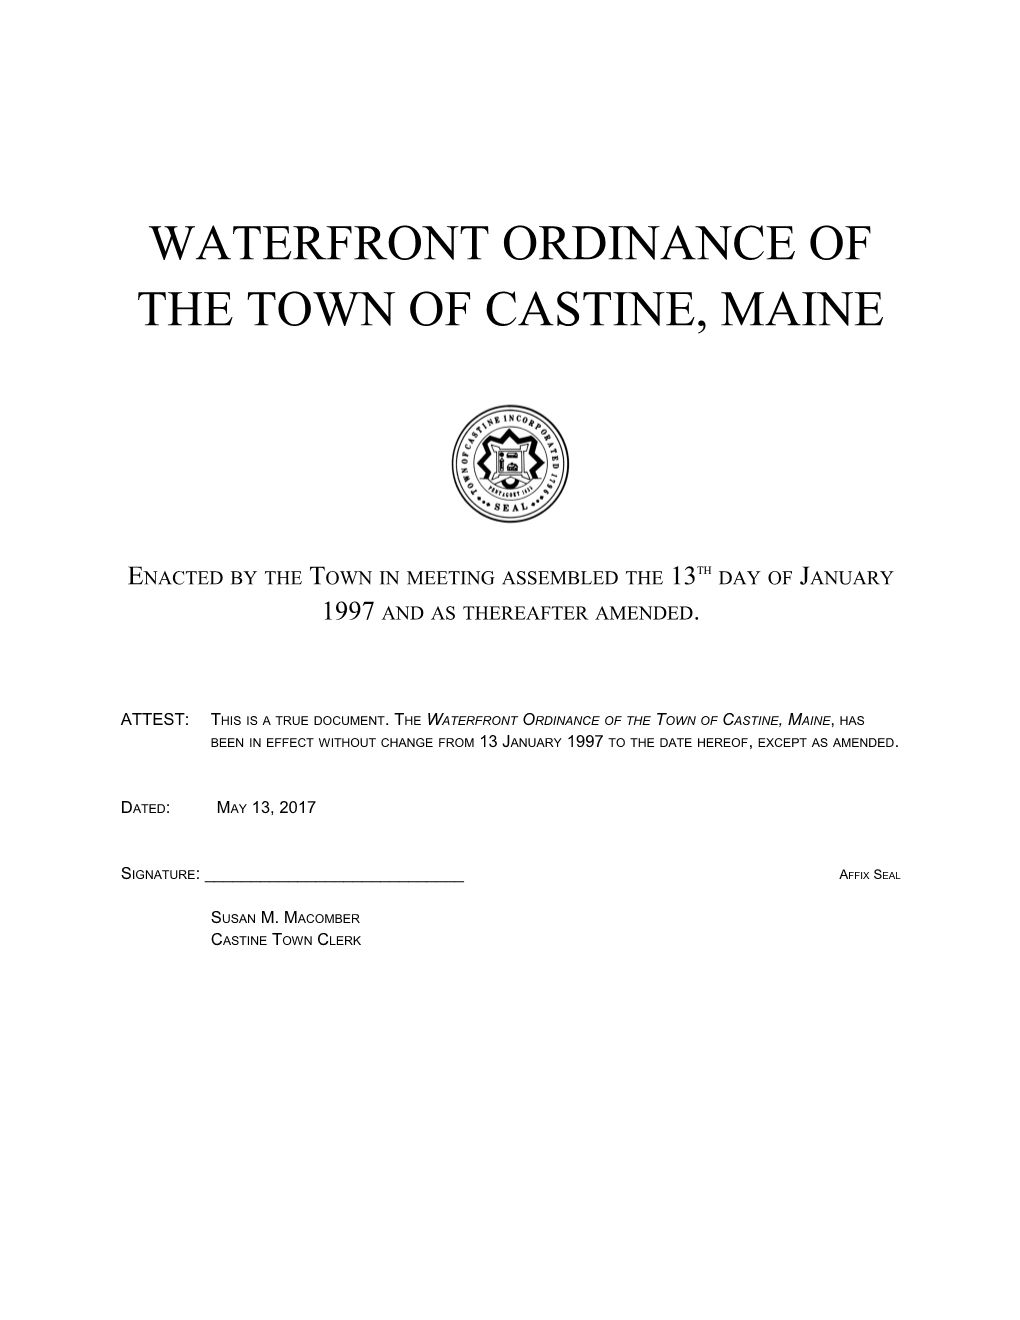 Waterfront Ordinance of the Town of Castine, Maine